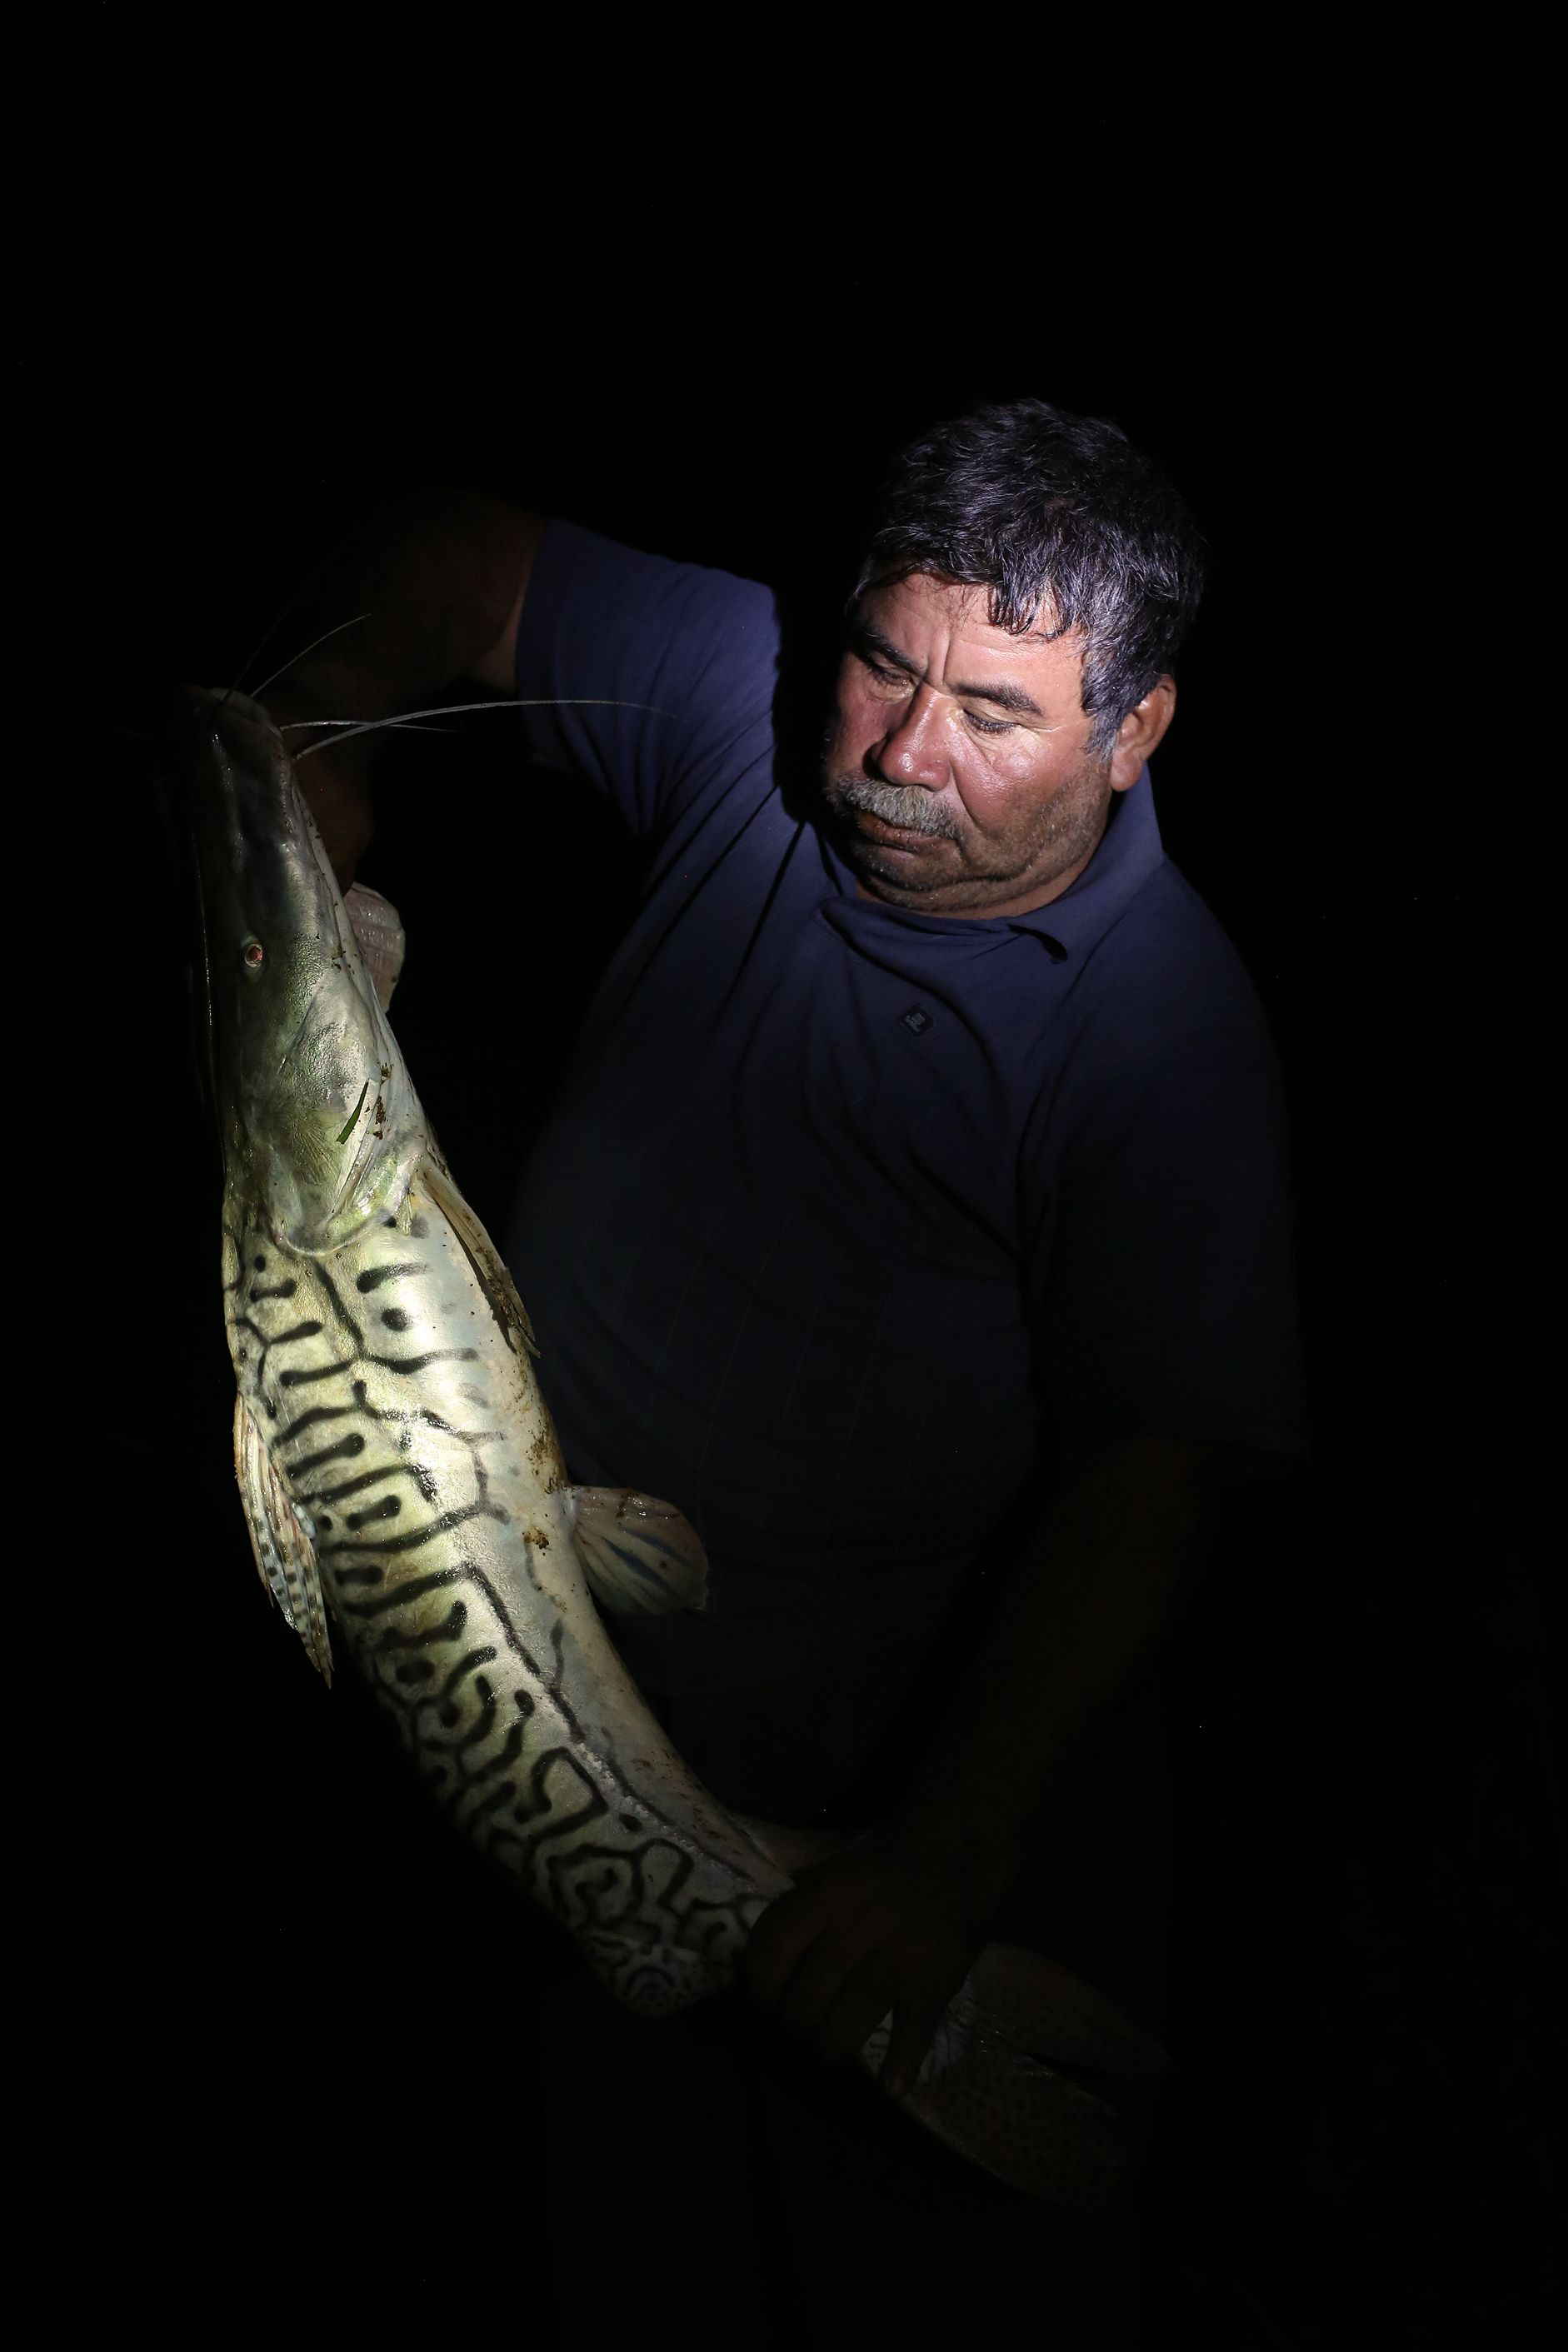 Savaraín Suarez leads the fishermen's cooperative in the town of San Buenaventura, just south of the paiche's current range. Here he holds a pintado, one of several local catfish species that are slowly disappearing from Bolivia's Amazon, largely, he and other fishermen believe, due to the predation of the invasive Arapaima gigas. Image by Felipe Luna. Bolivia, 2018.